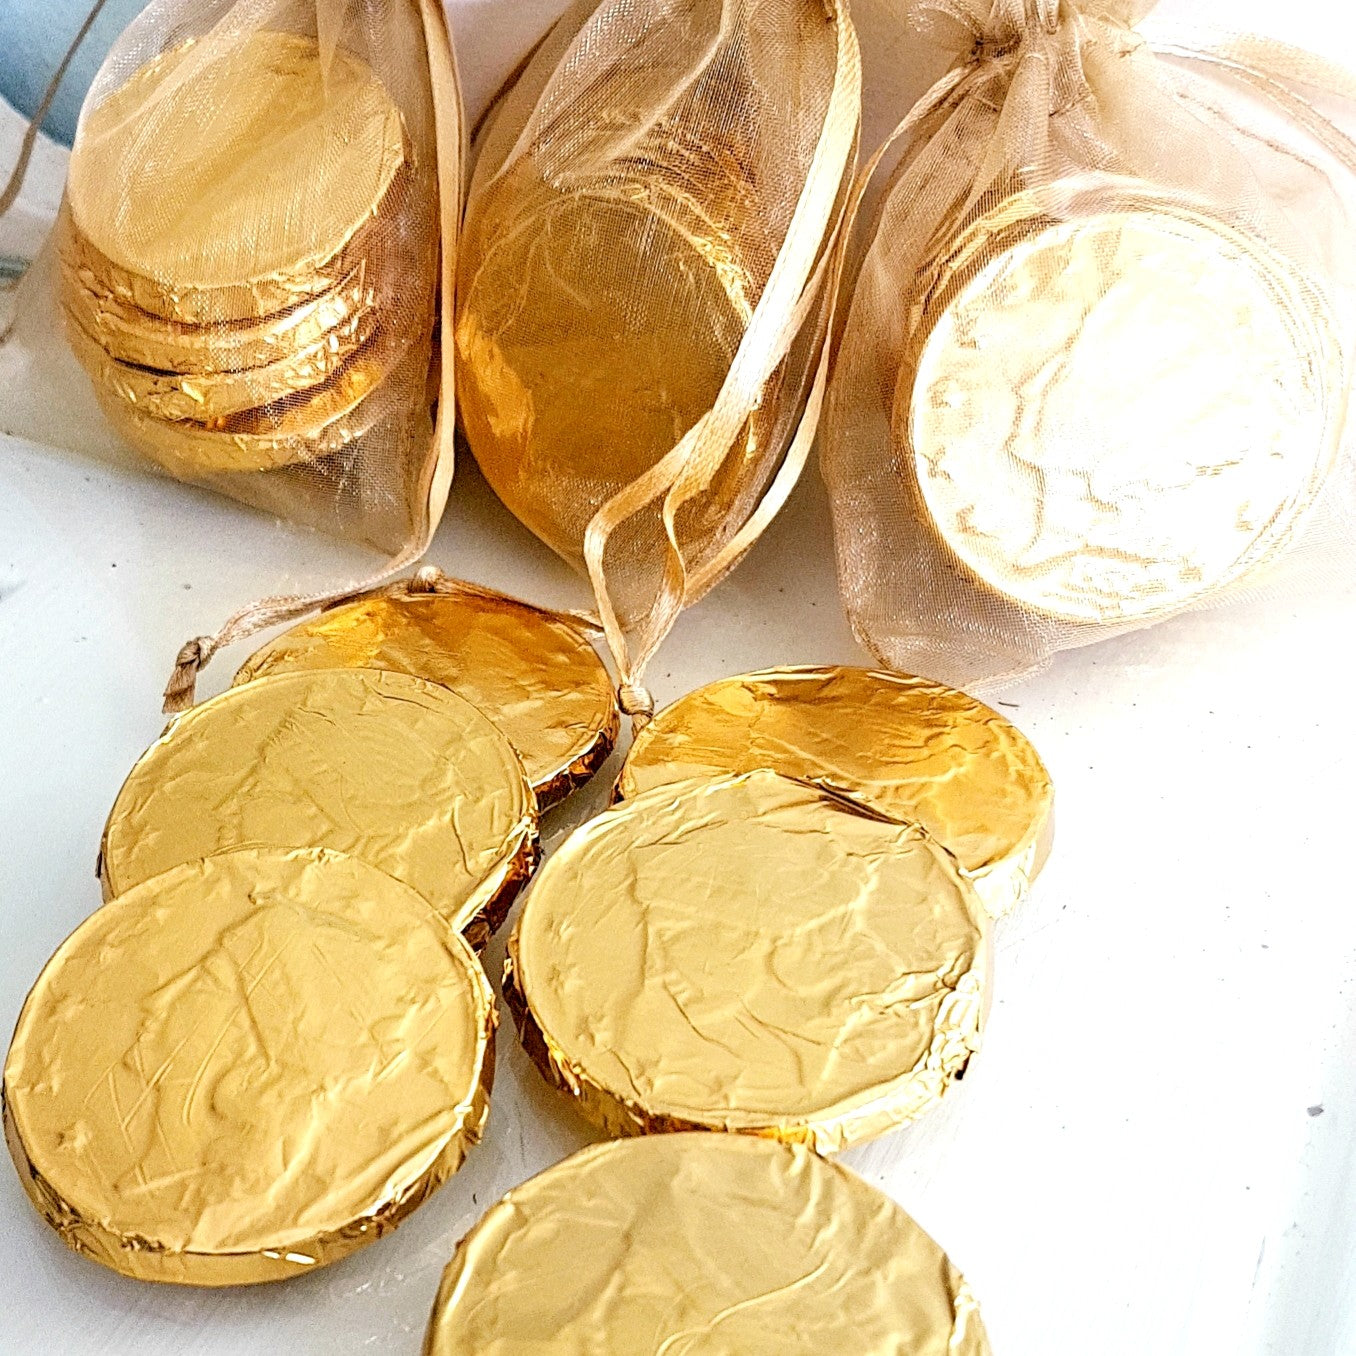 Bag of Six Foil Wrapped Chocolate Coins